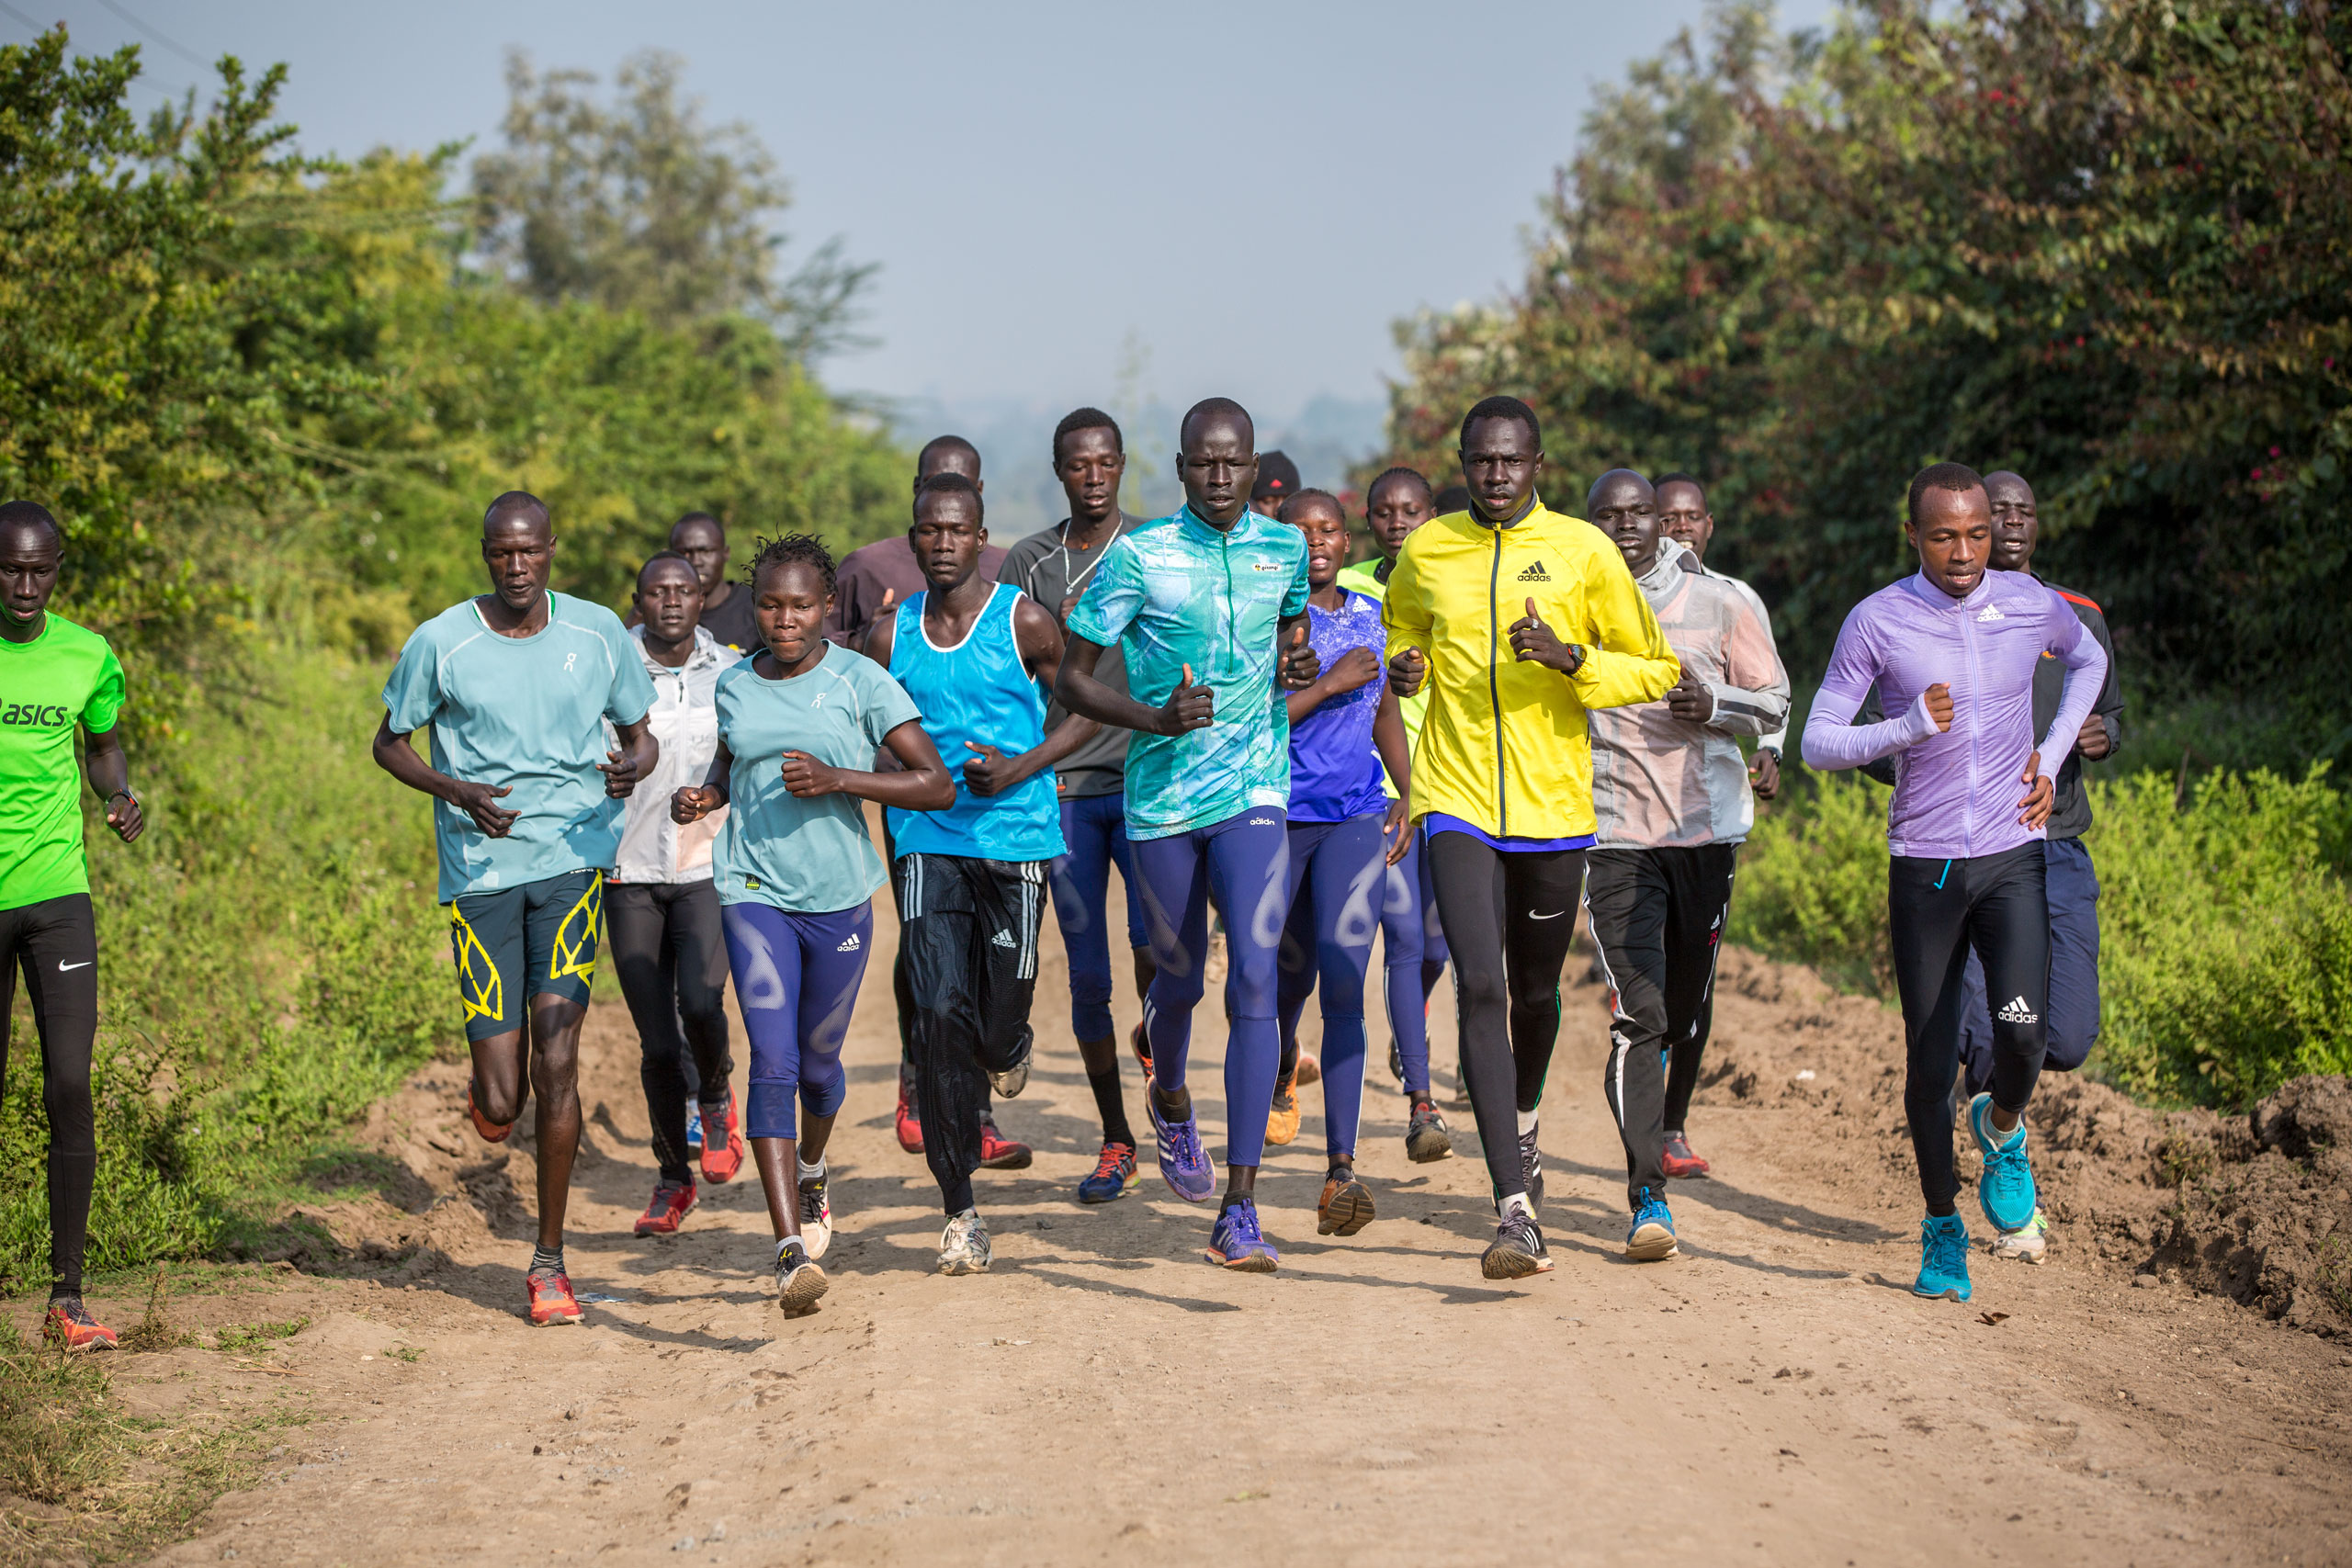 At Loroupe’s training center in Kenya, refugee runners worked hard to earn one of 10 spots on the squad bound for Brazil (Jiro Ose—REDUX/Sports Illustrated)